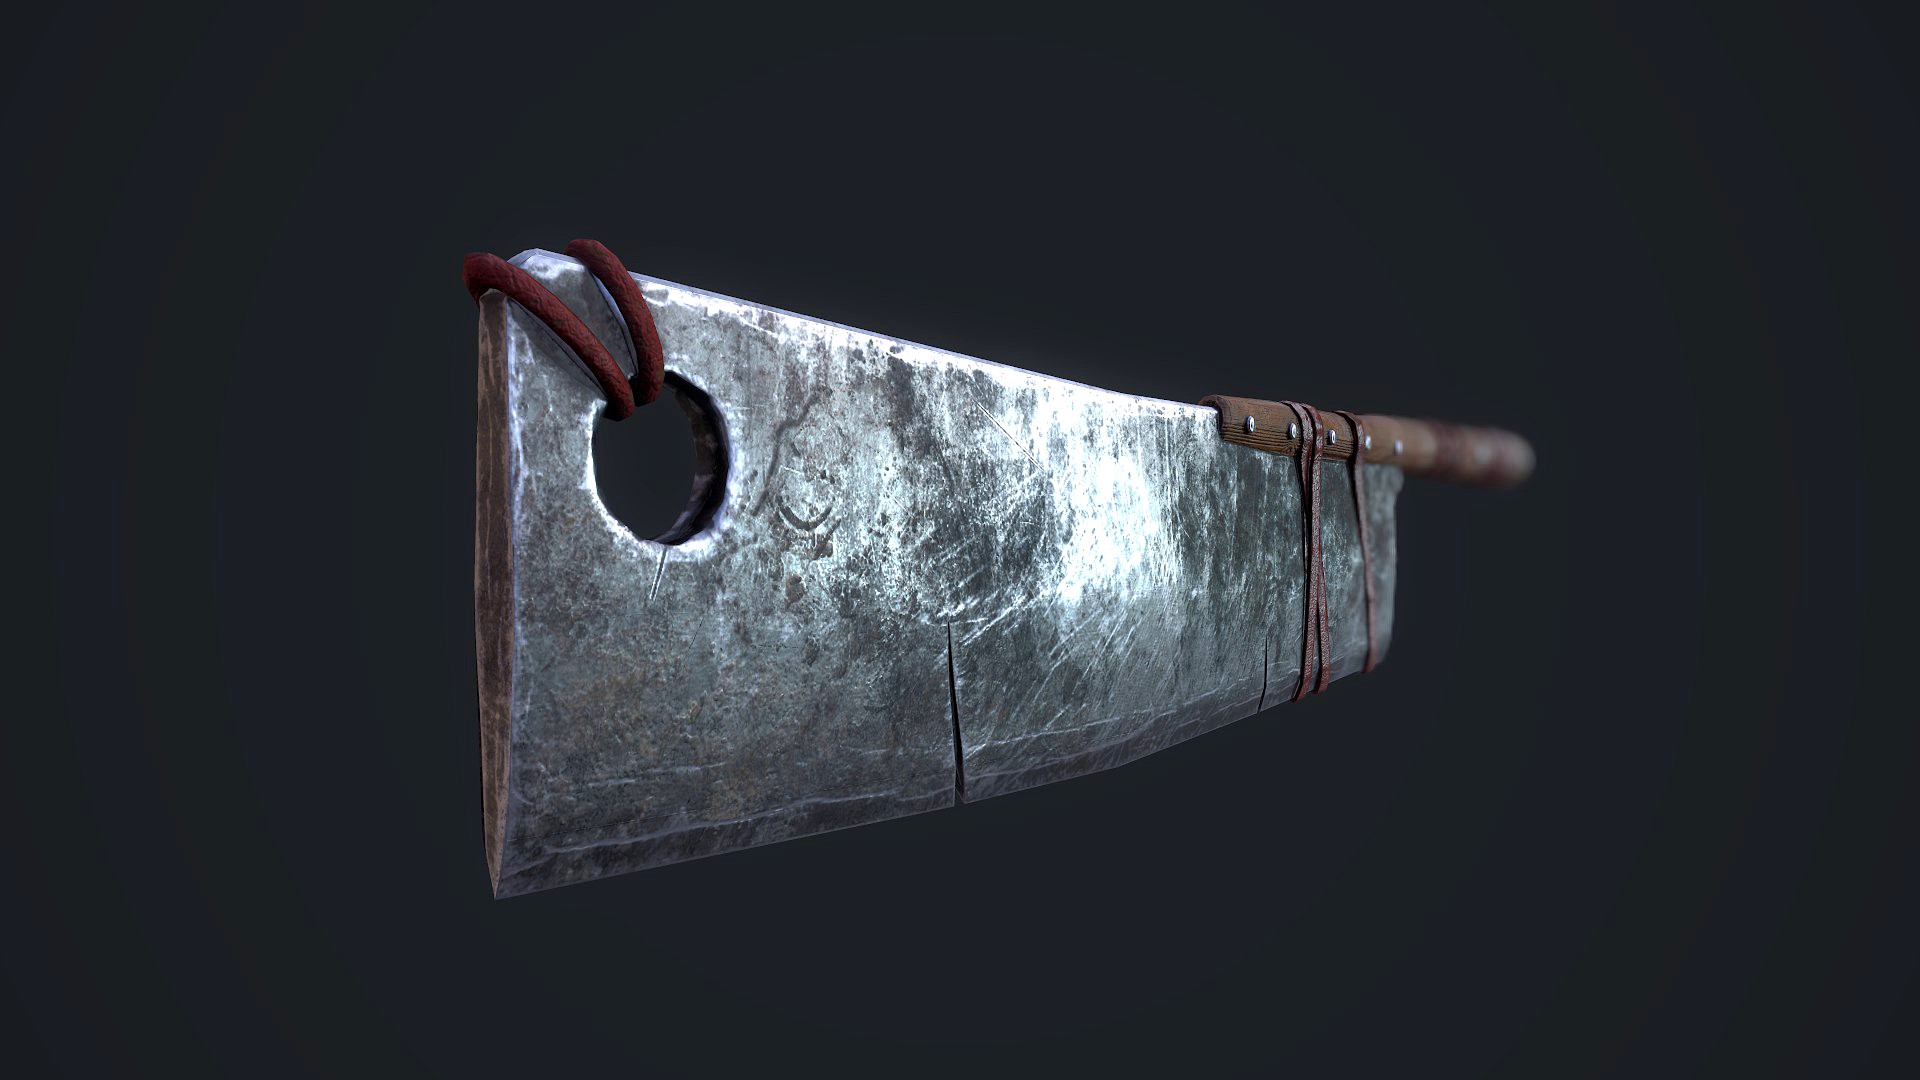 Apocalyptic Cleaver